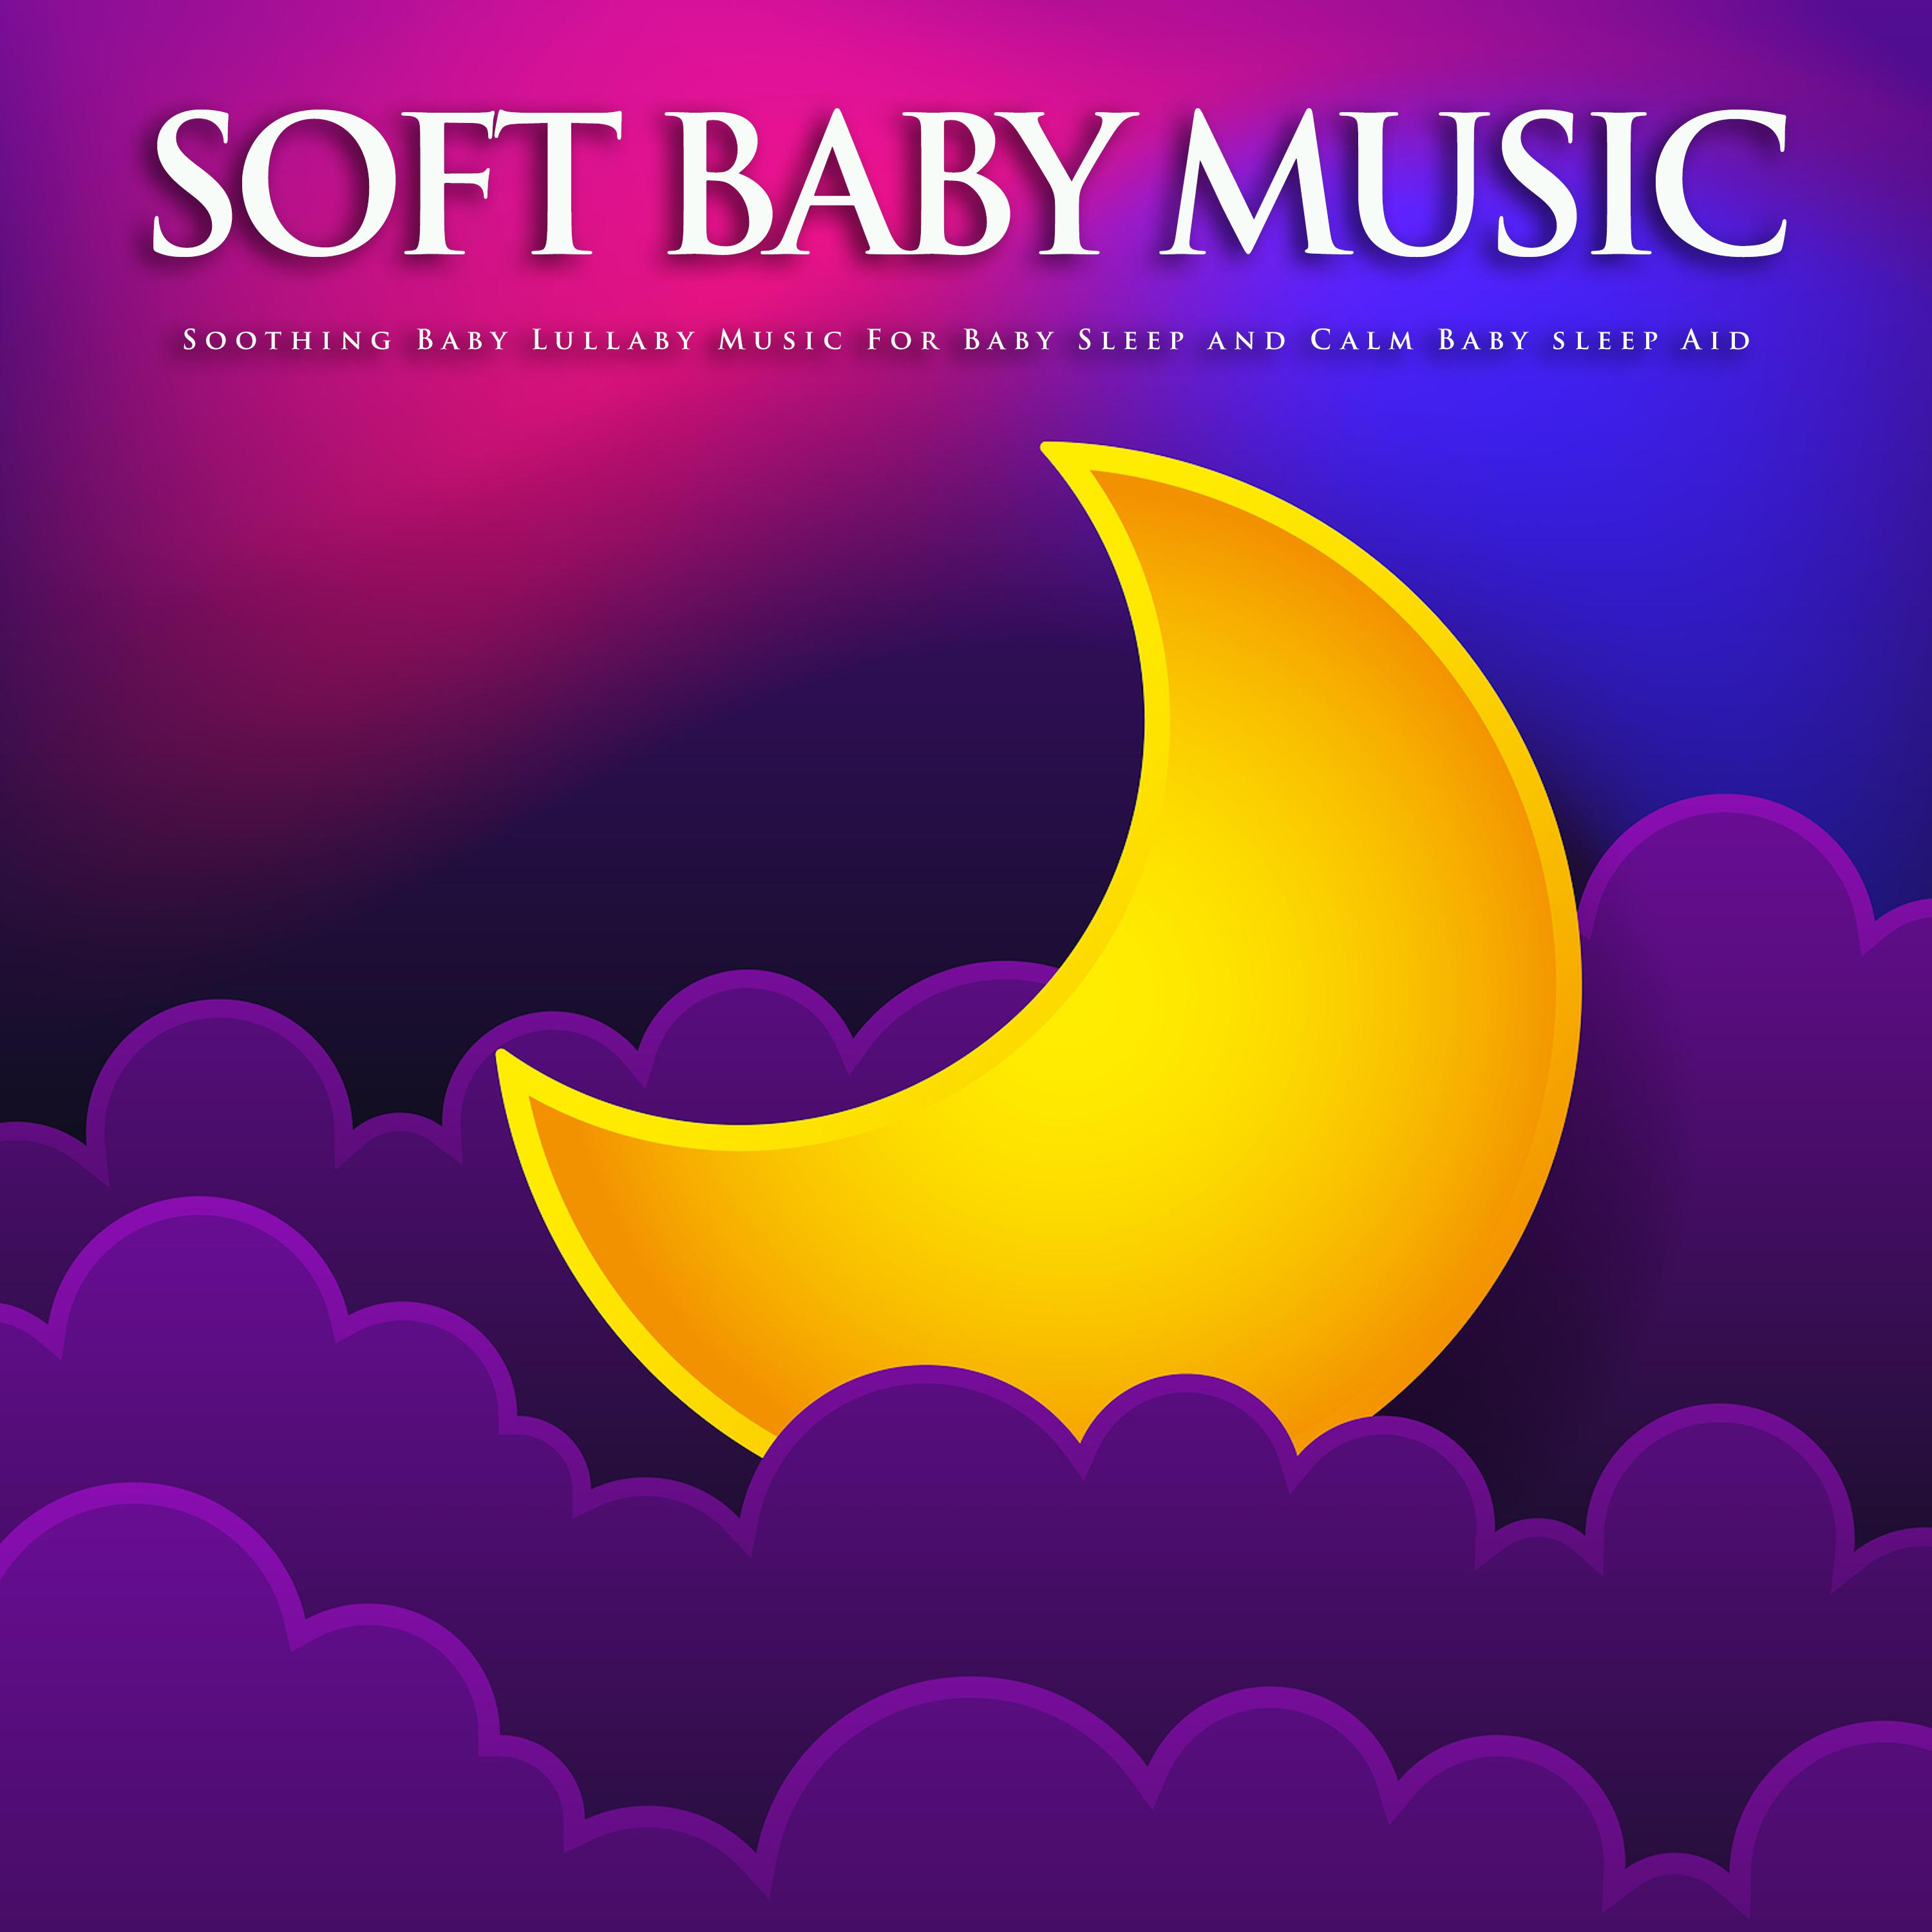 Soft Baby Music: Soothing Baby Lullaby Music For Baby Sleep and Calm Baby Sleep Aid